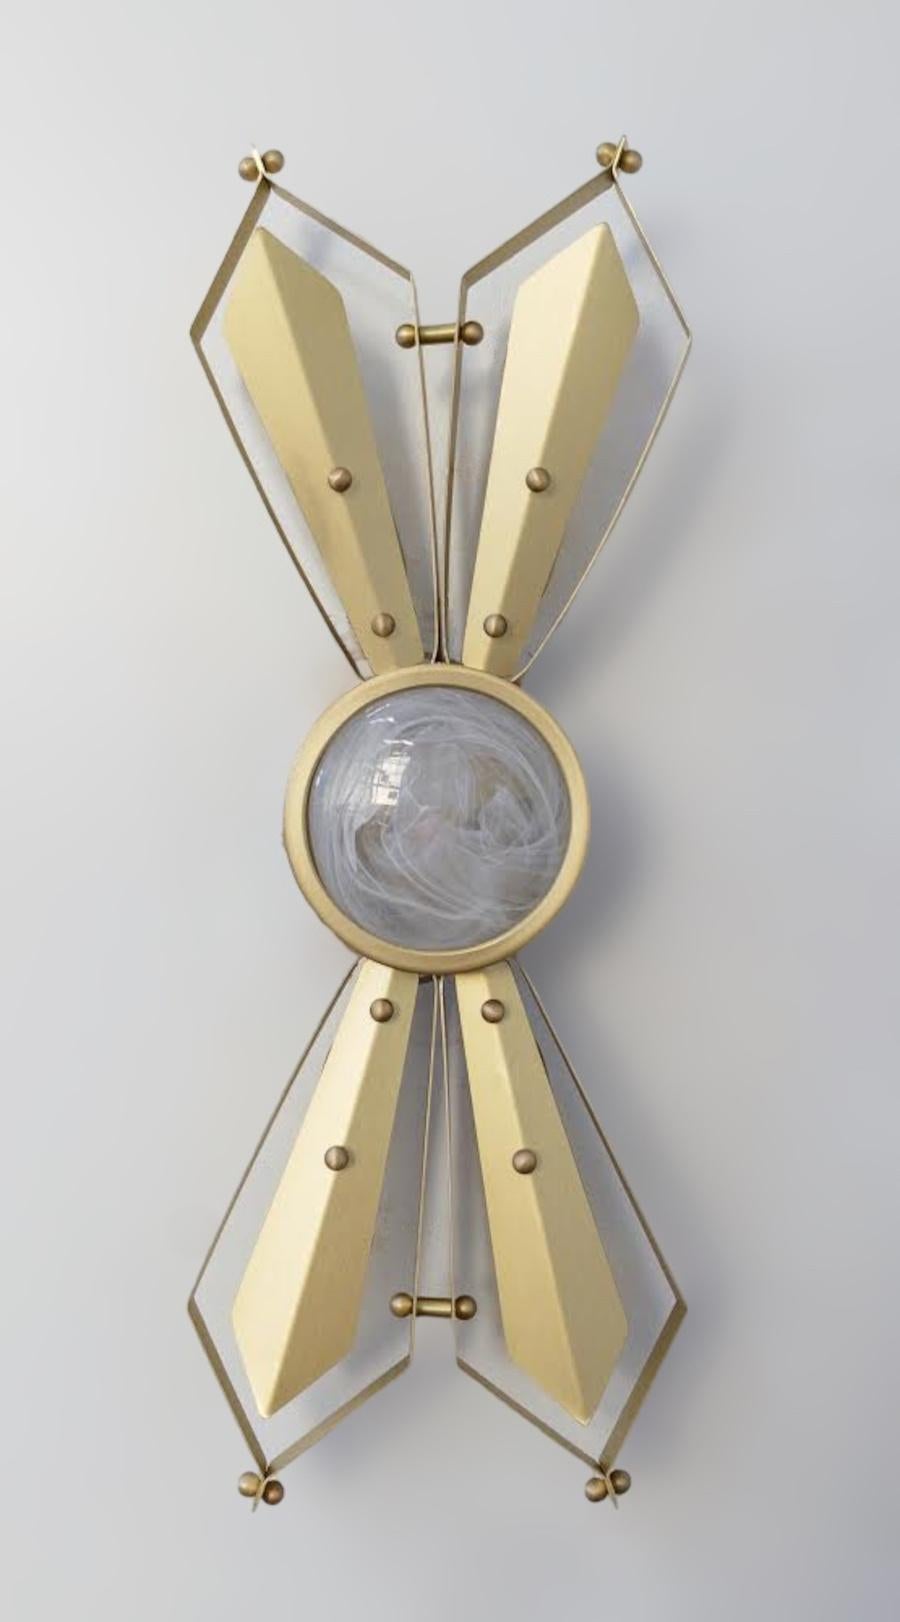 Elegant Italian wall light with satin brass frame and a clear with white Murano glass lens diffuser at the center, designed by Fabio Bergomi for Fabio Ltd / Made in Italy
4 lights / E12 or E14 type / max 40W each
Measures: height 21 inches, width